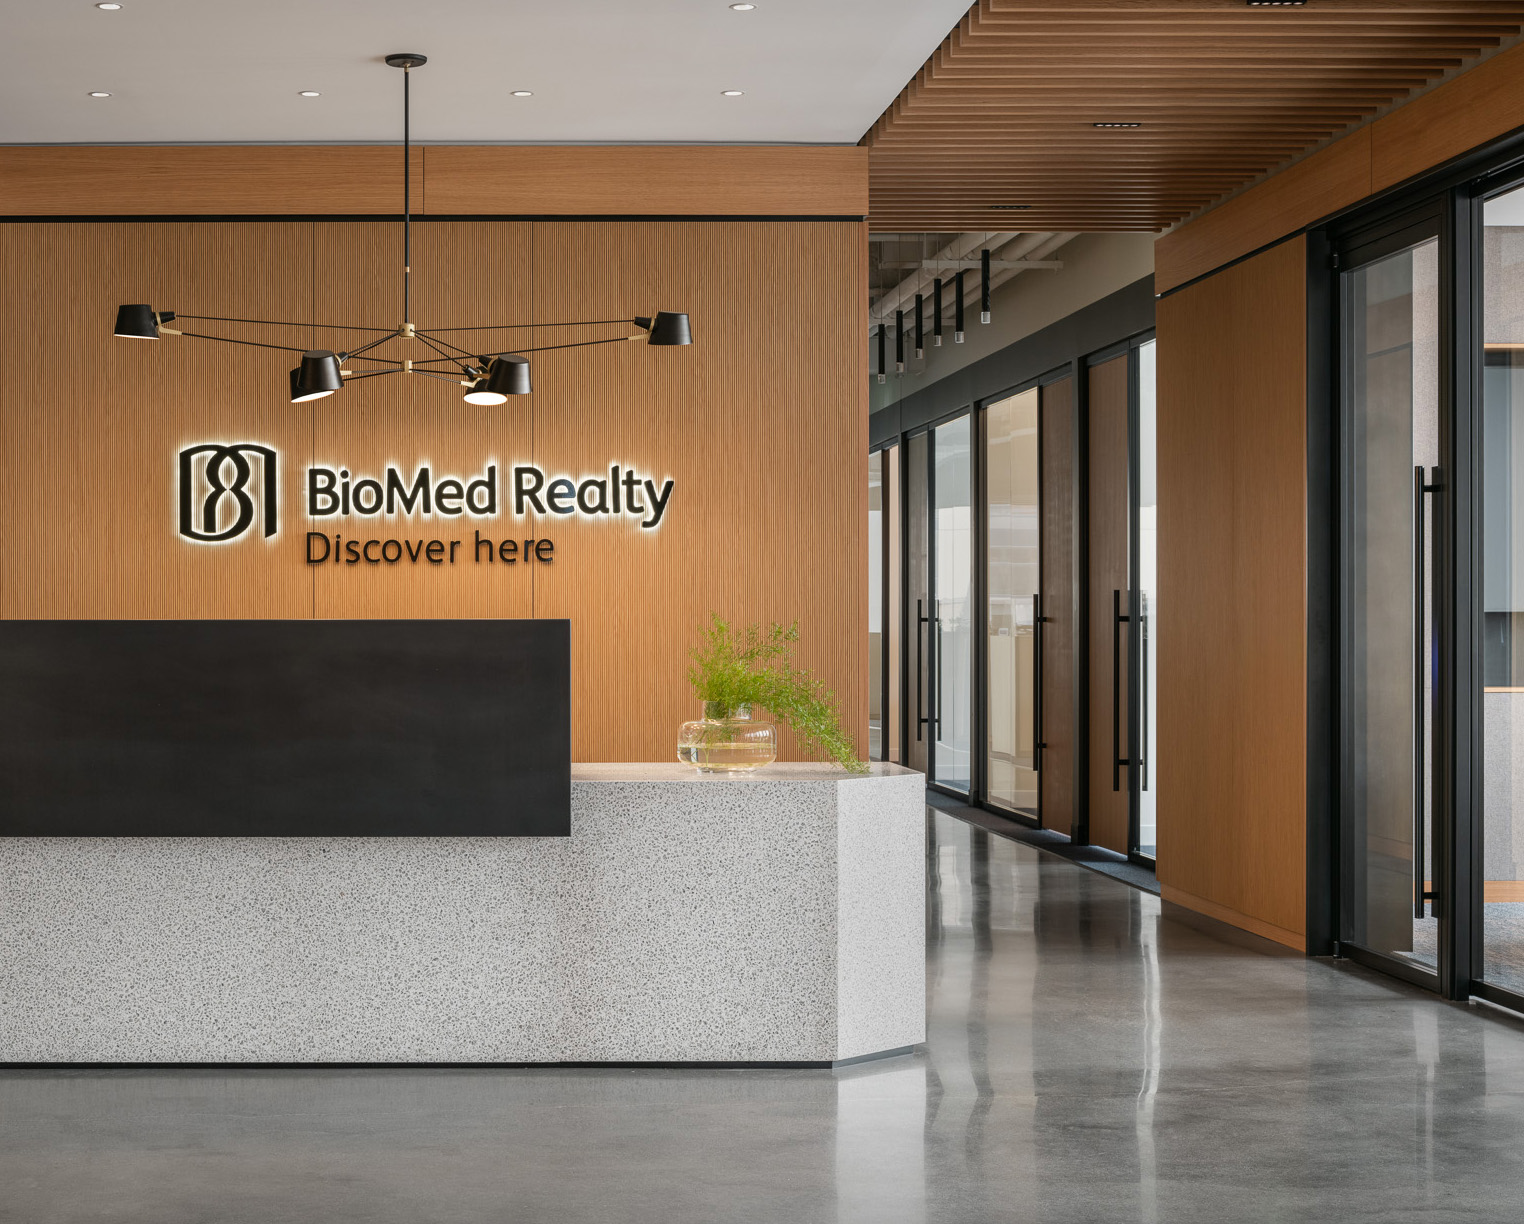 [PREFERRED]_BioMed Realty Offices_Trent Bell Photography